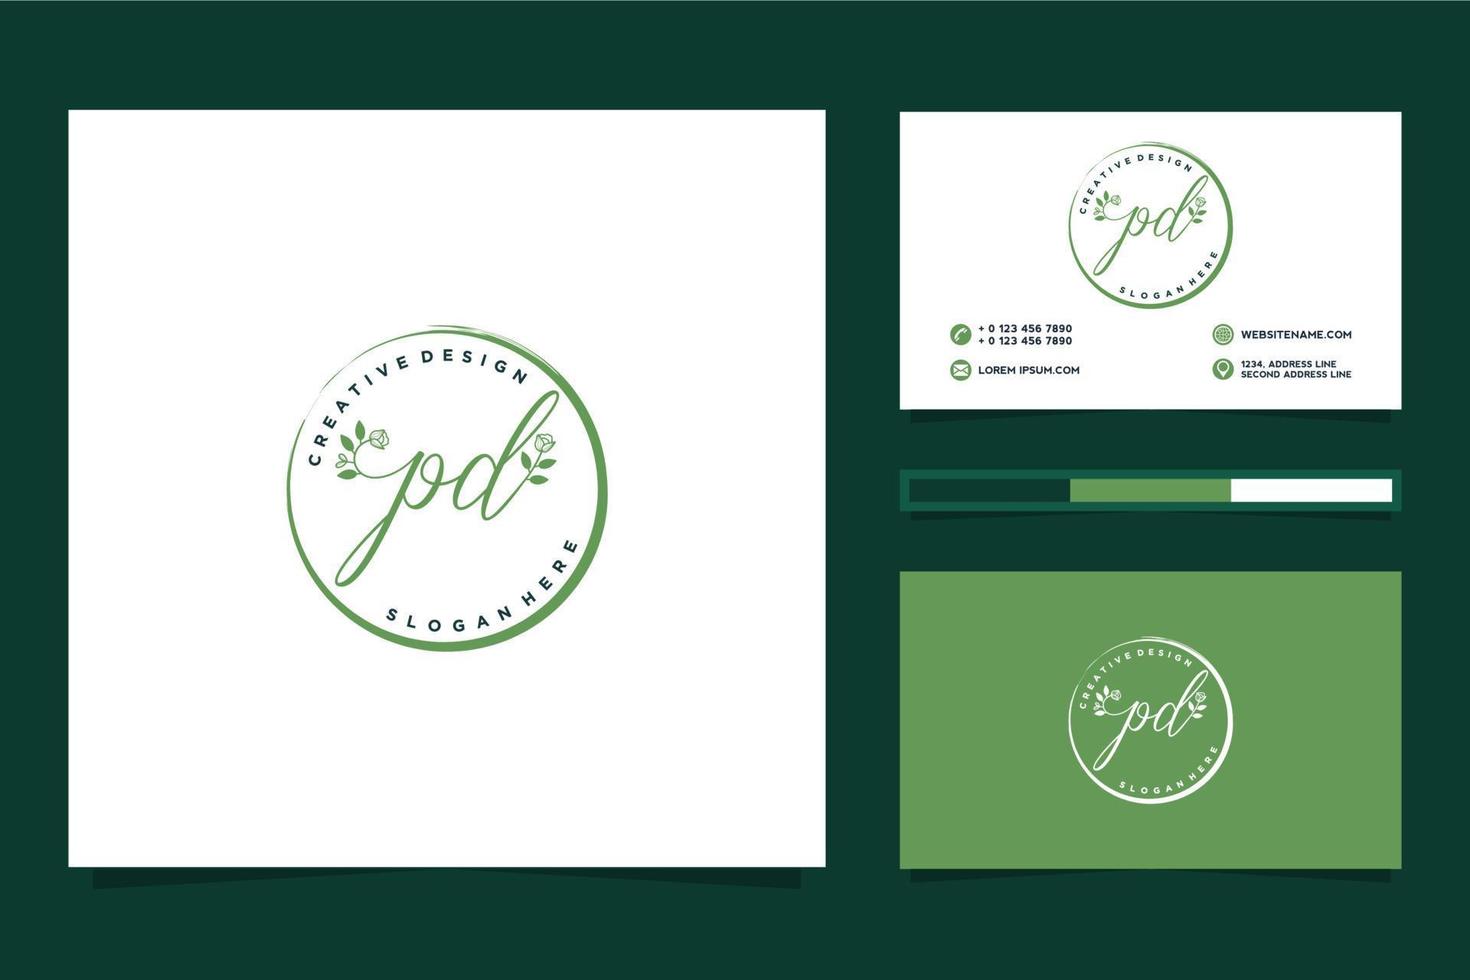 Initial PD Feminine logo collections and business card template Premium Vector